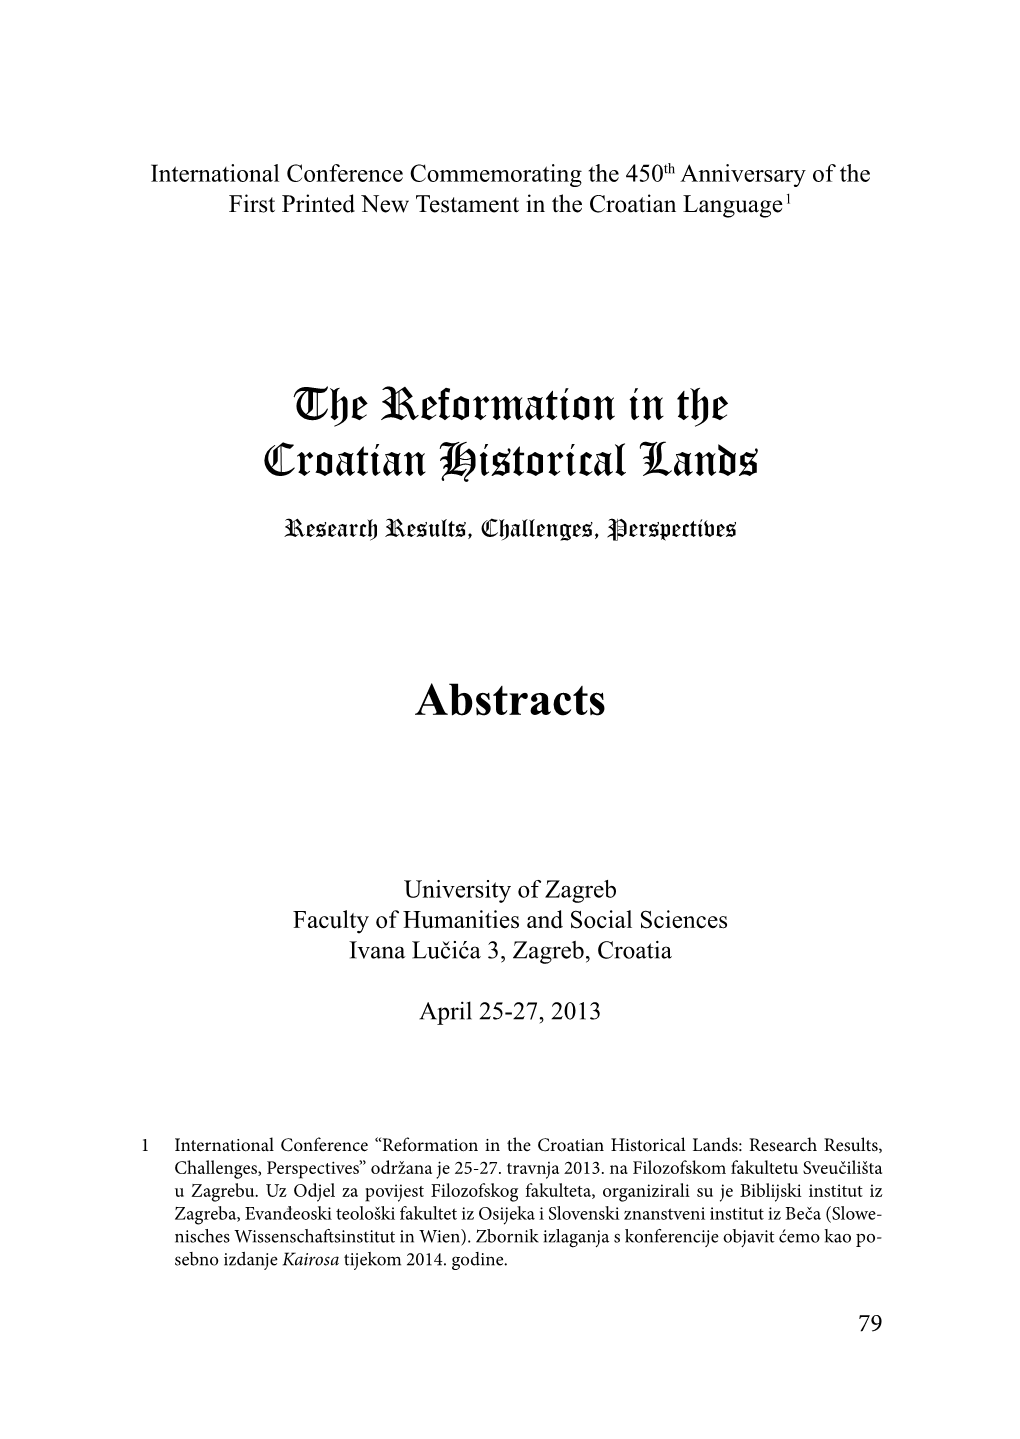 The Reformation in the Croatian Historical Lands Abstracts